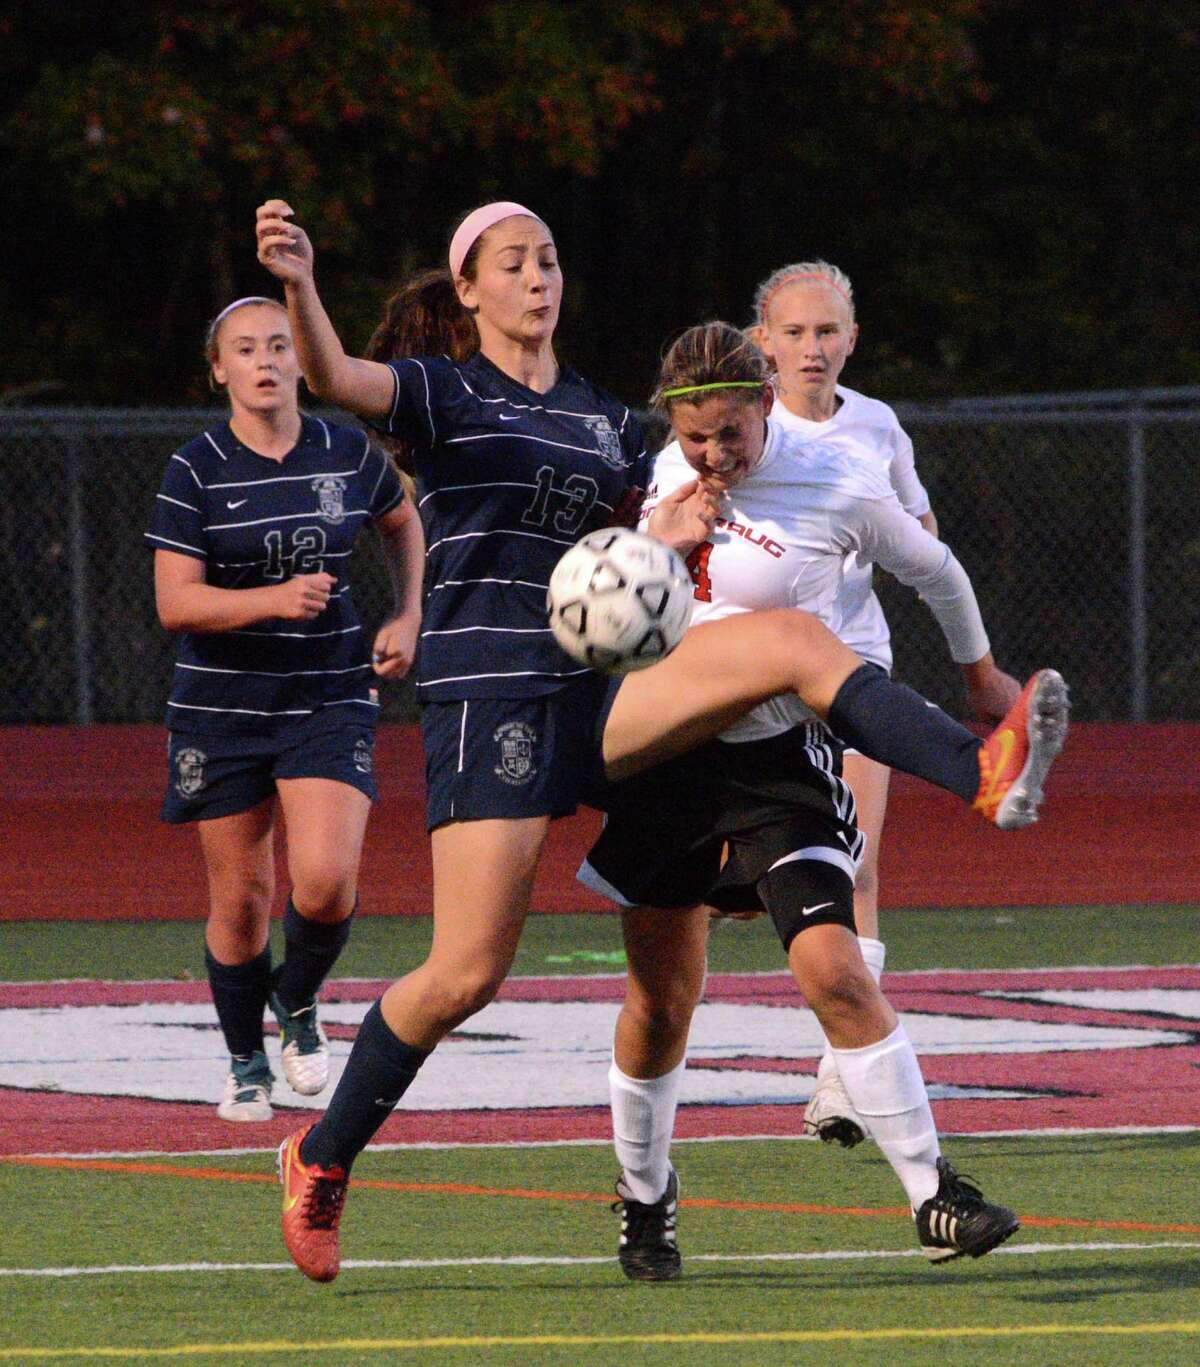 Immaculate High Schools Paige Davis fights for possession of the ball against Pomperaug High Schools Lauren Piro during a game at Pomperaug on Monday, October 6, 2014.